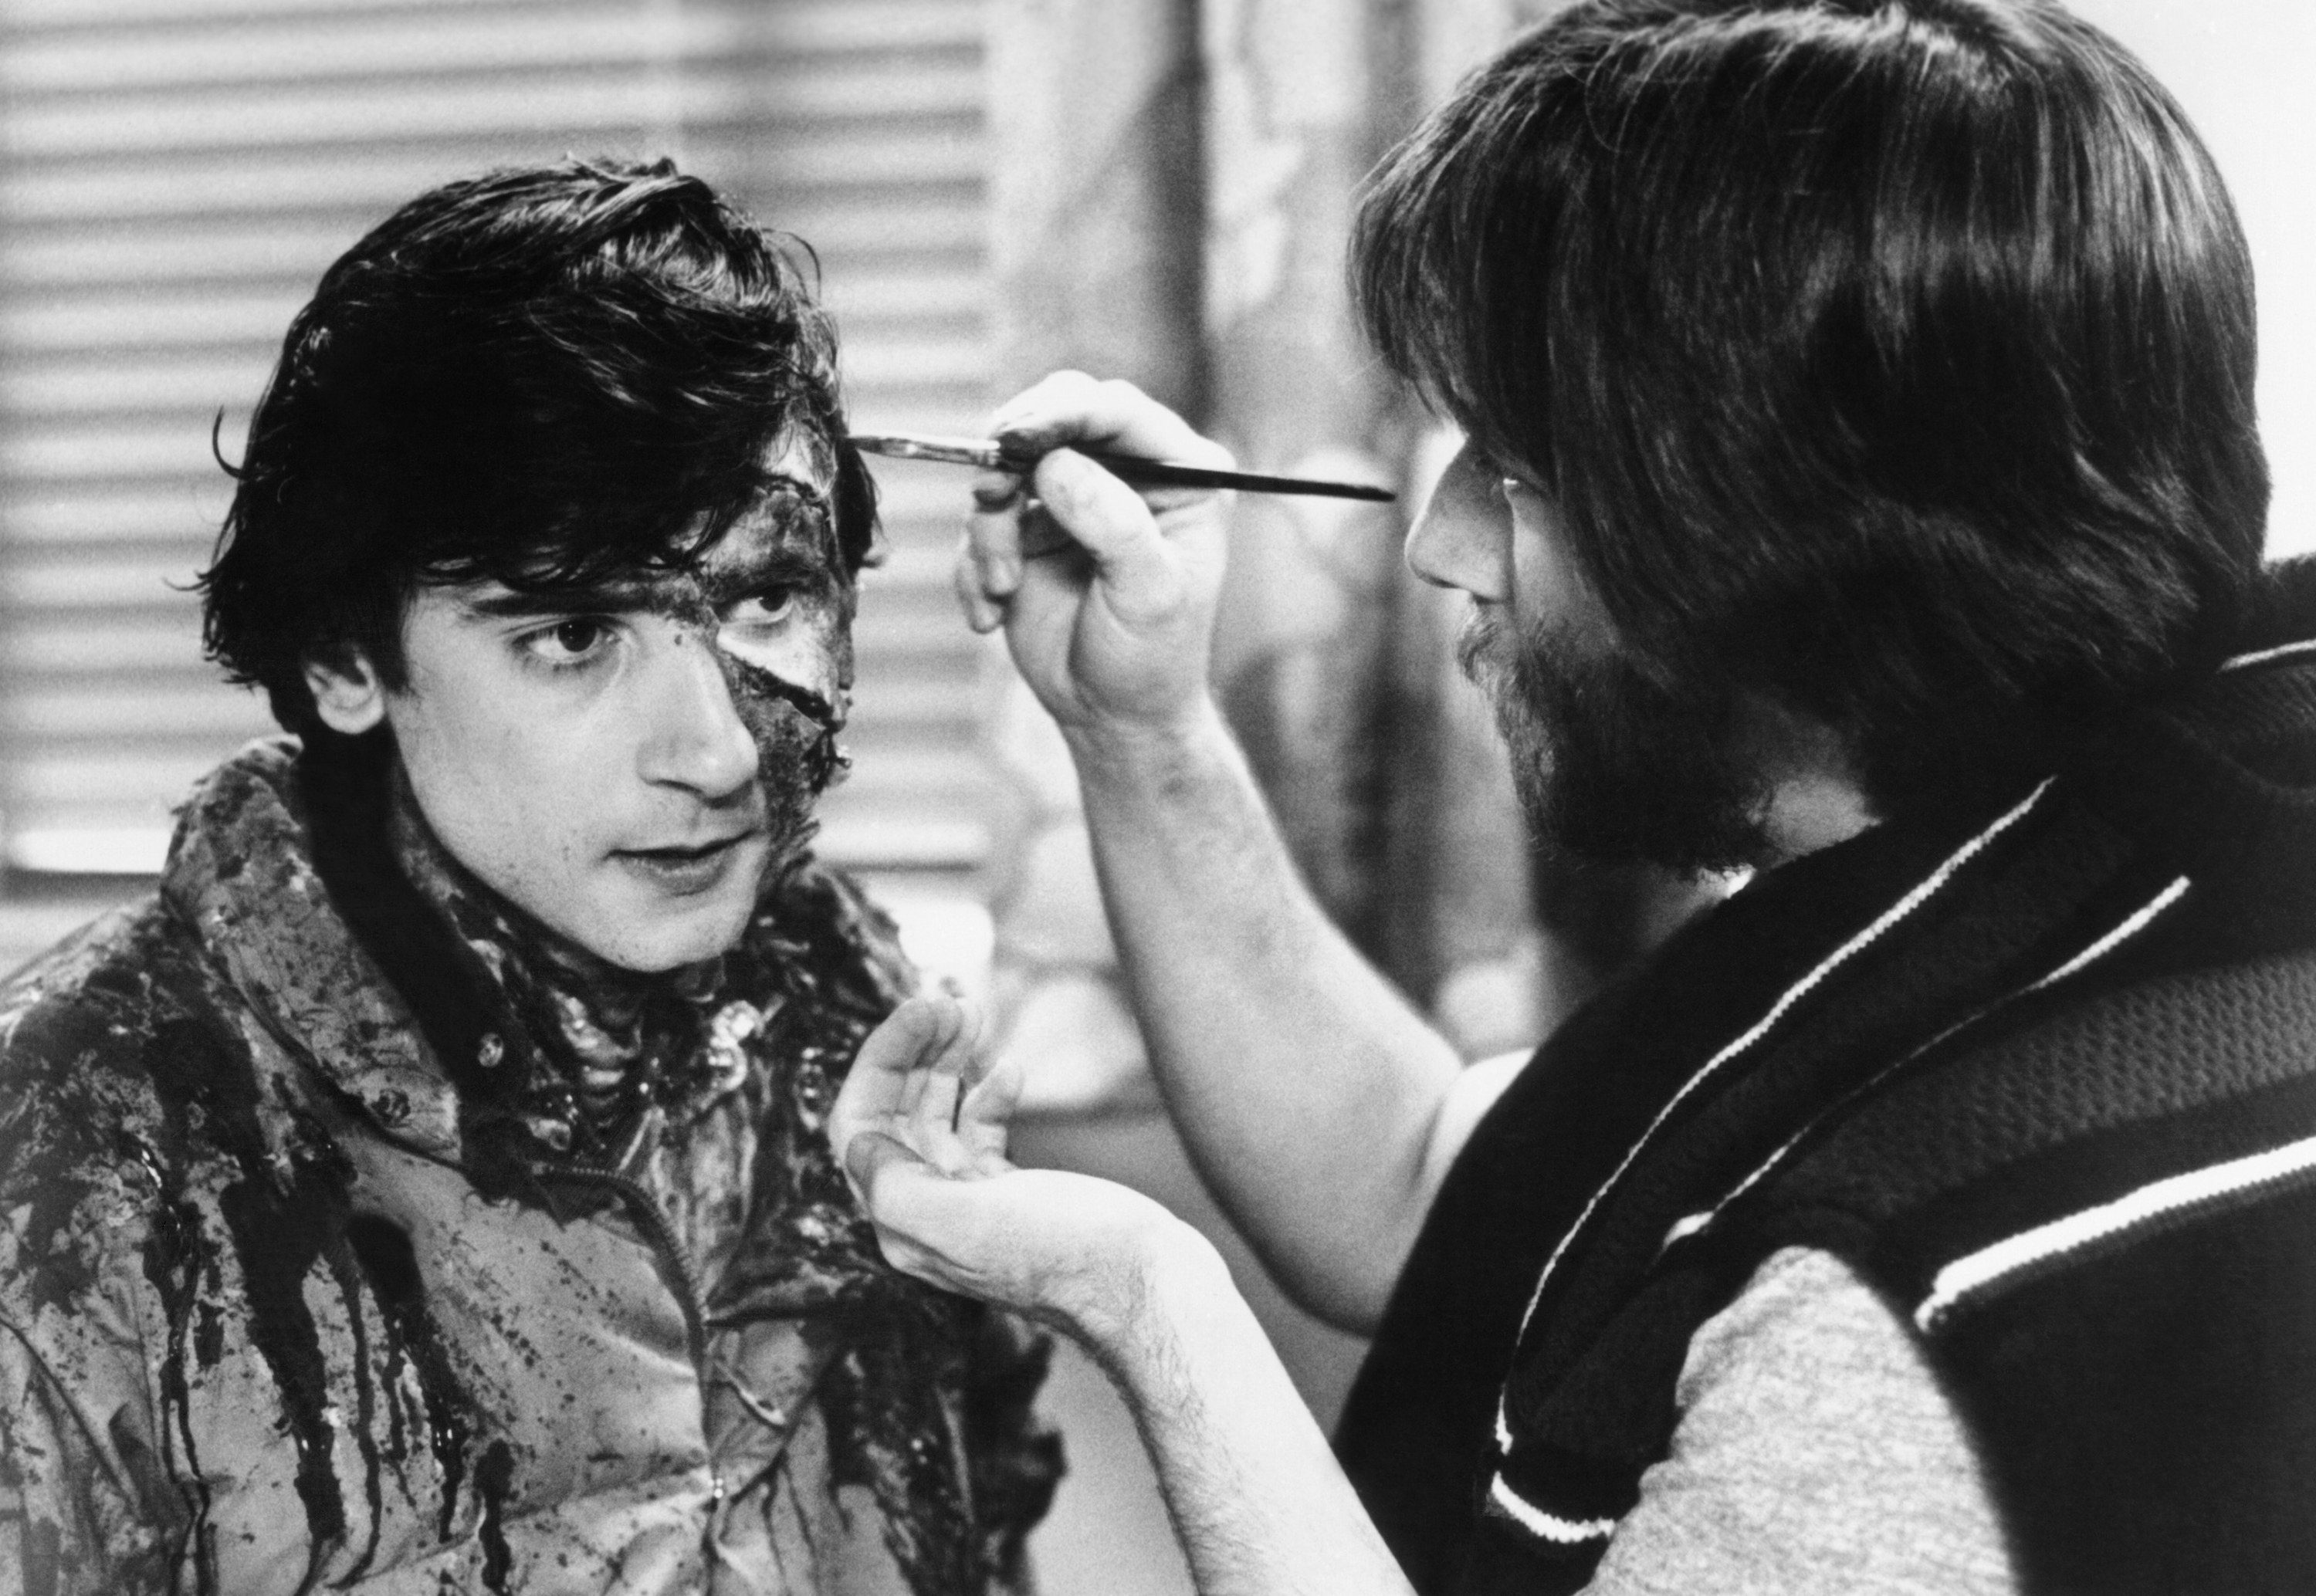 Rick Baker, right, applies makeup to Griffin Dunne, on-set